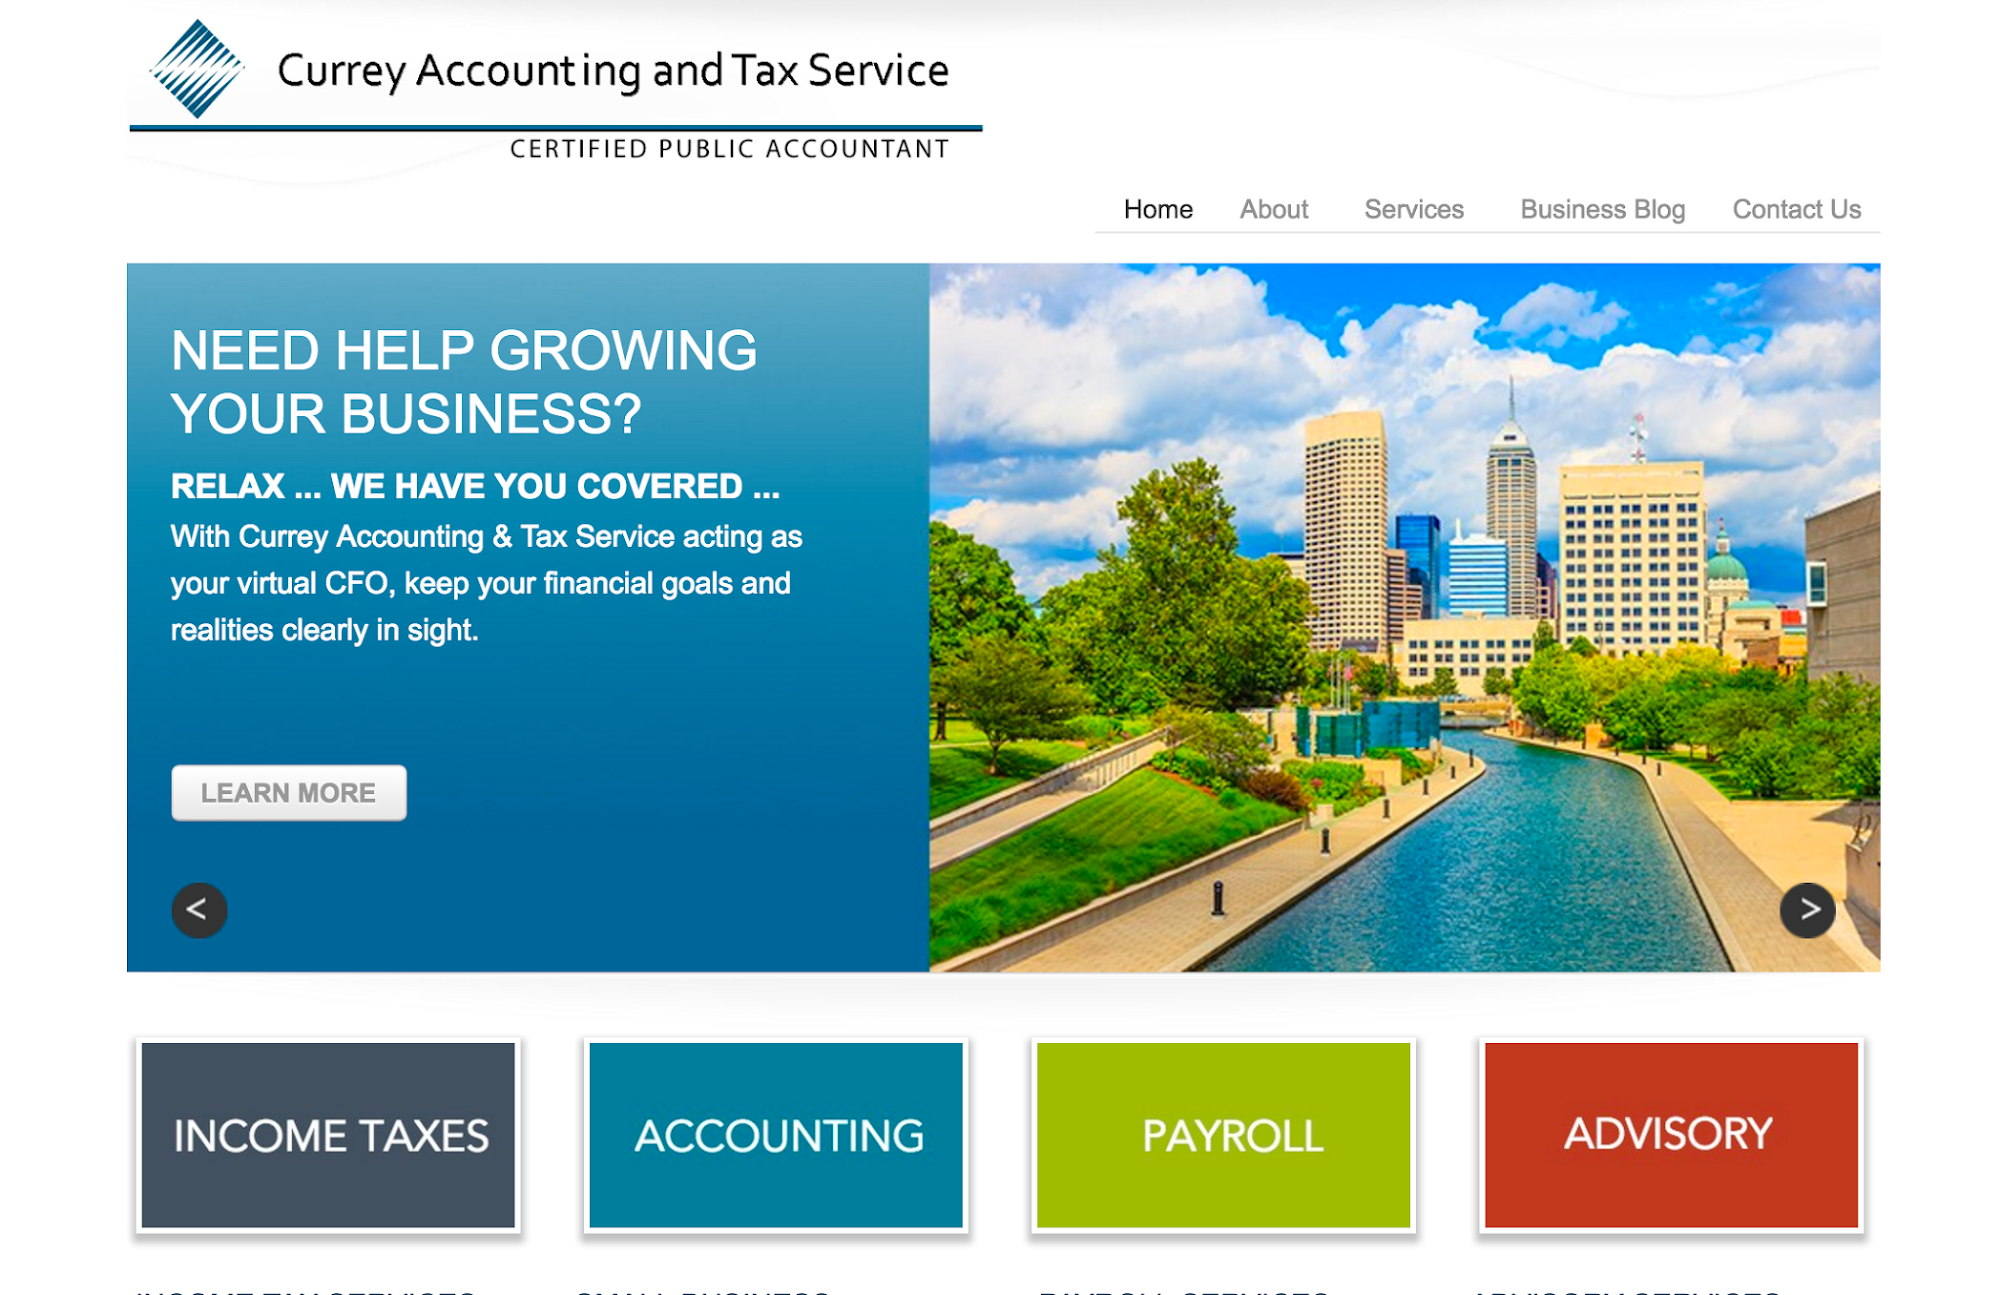 Currey Accounting & Tax Service